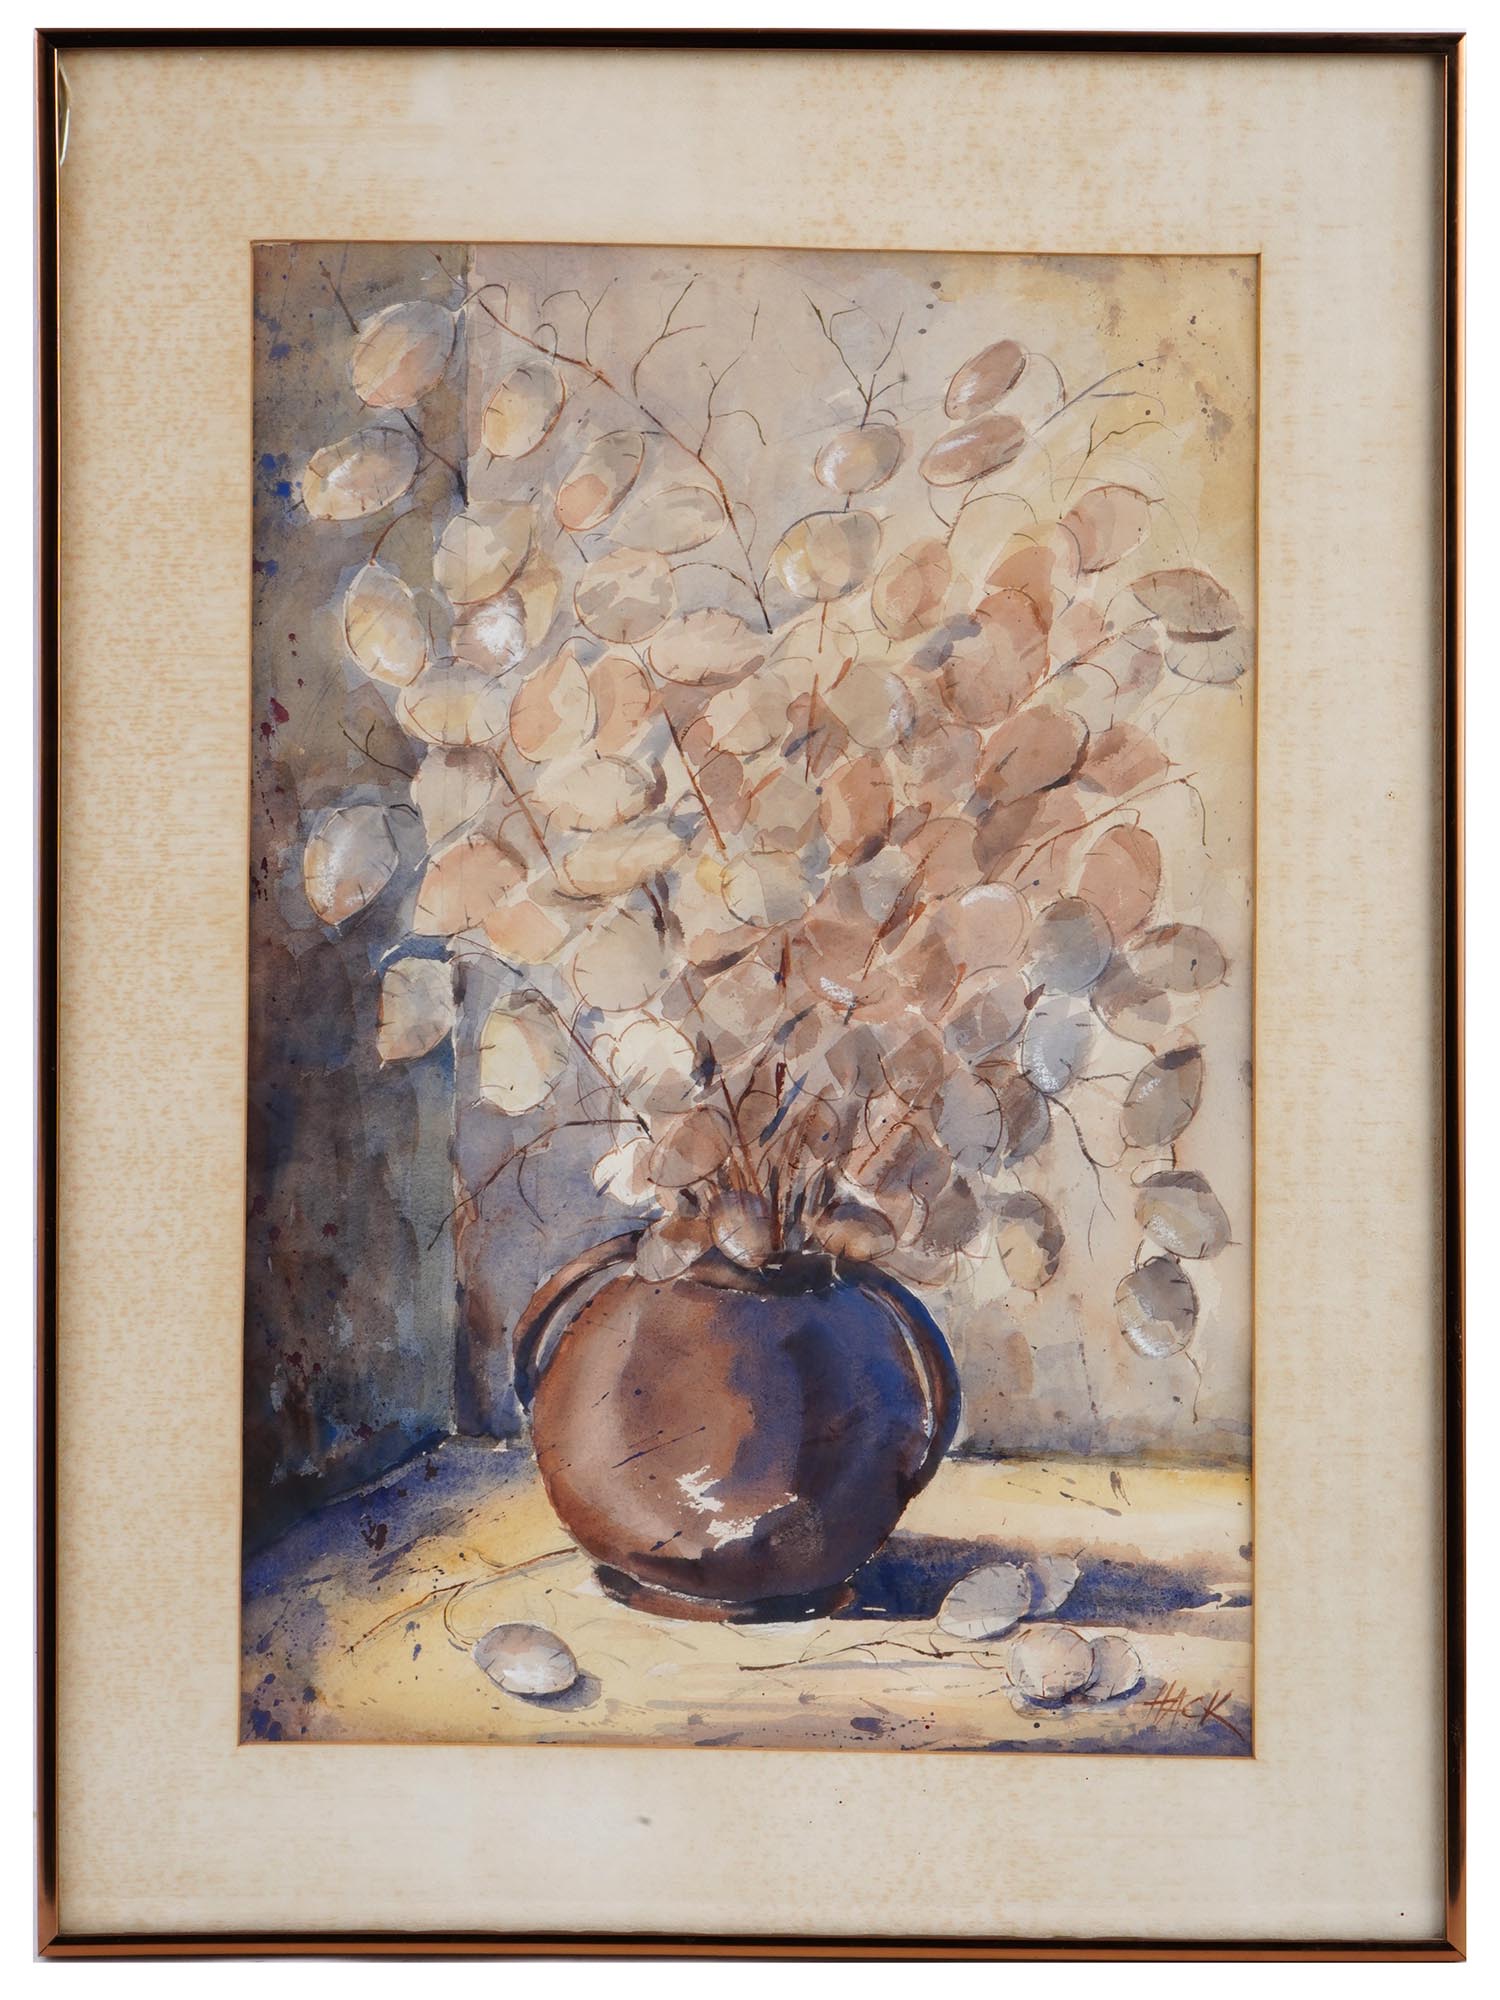 STILL LIFE WATERCOLOR PAINTING SIGNED BY BOB HACK PIC-0